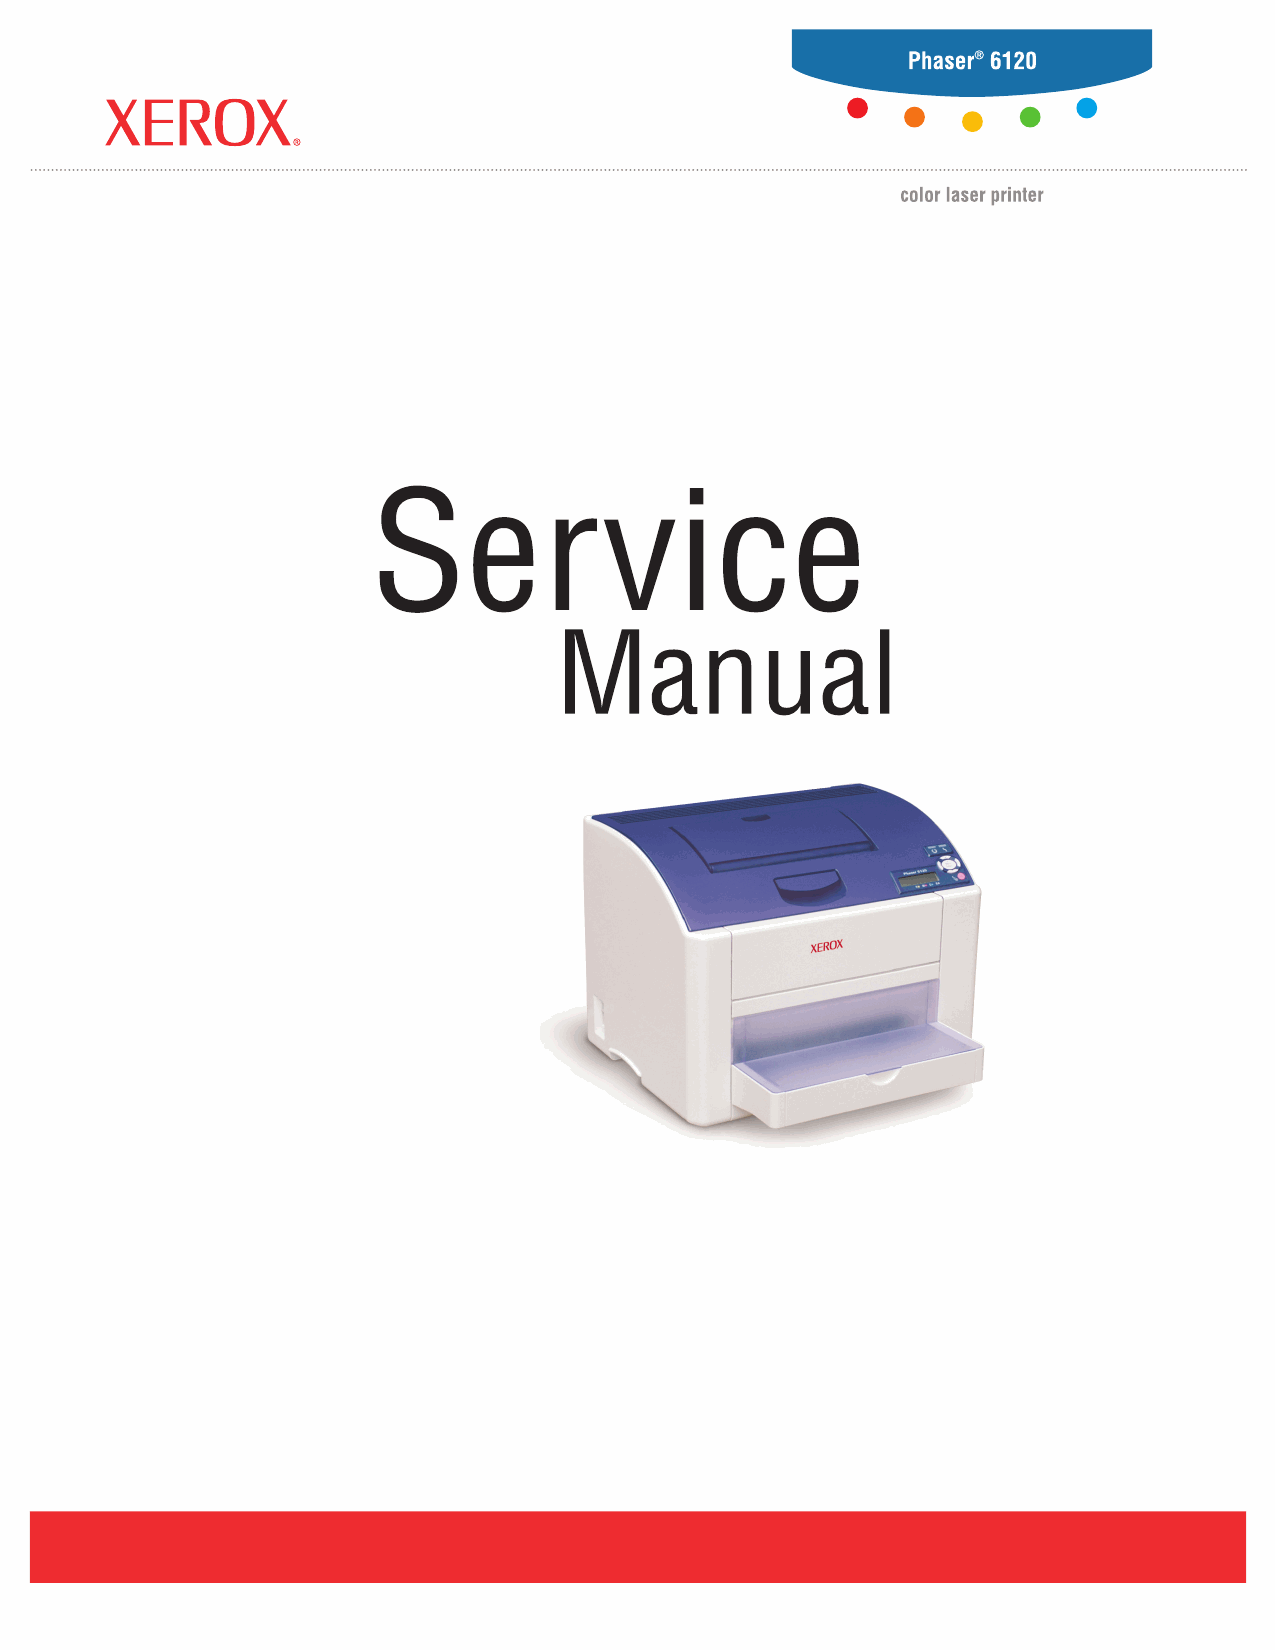 Xerox Phaser 6120 Parts List and Service Manual-1